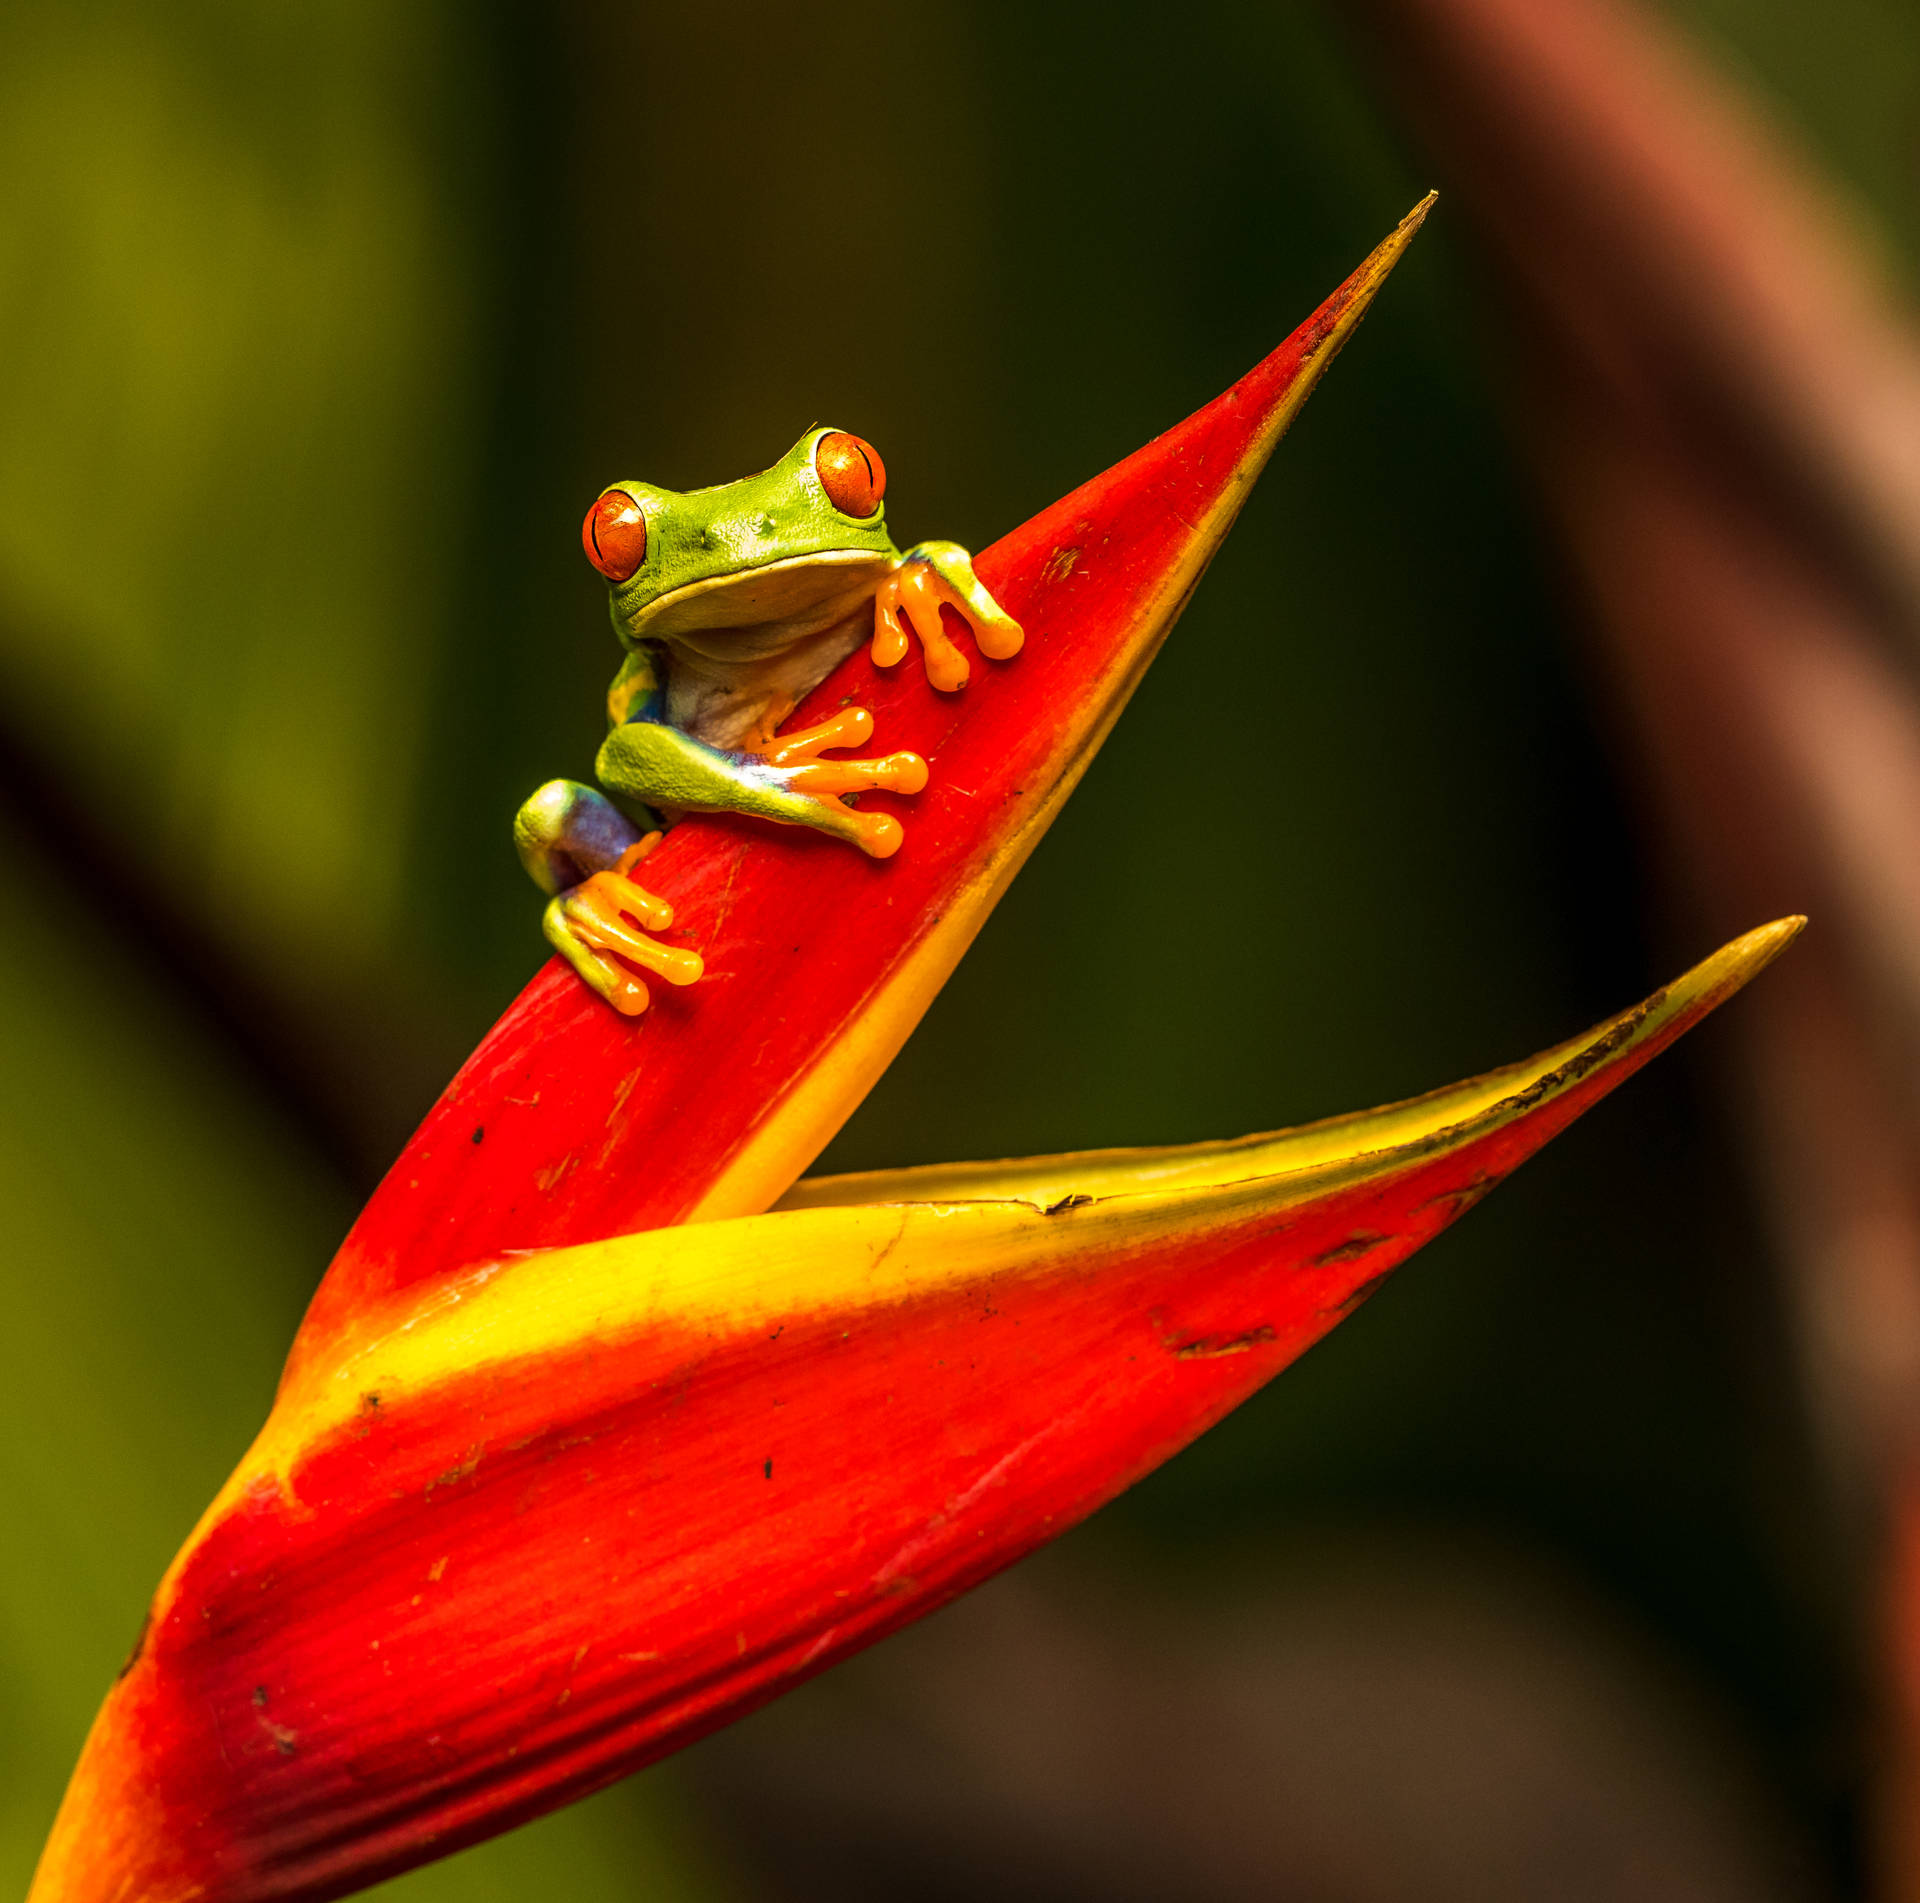 Frog 4145X4109 Wallpaper and Background Image